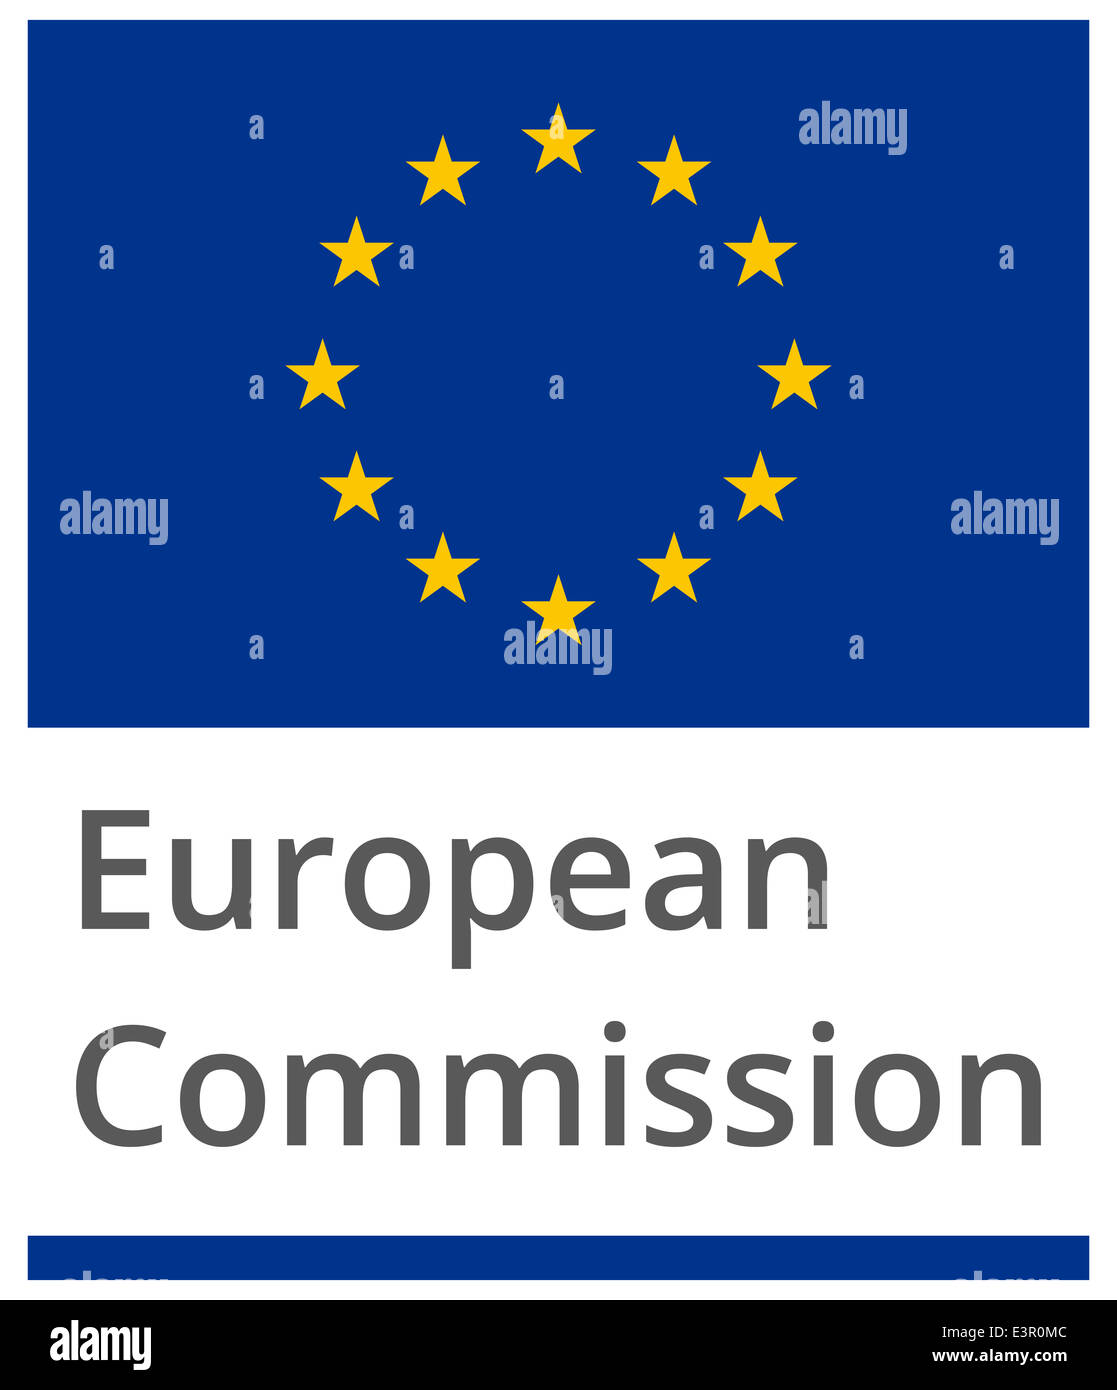 European Commission standard proportional sign - flat design on white background Stock Photo